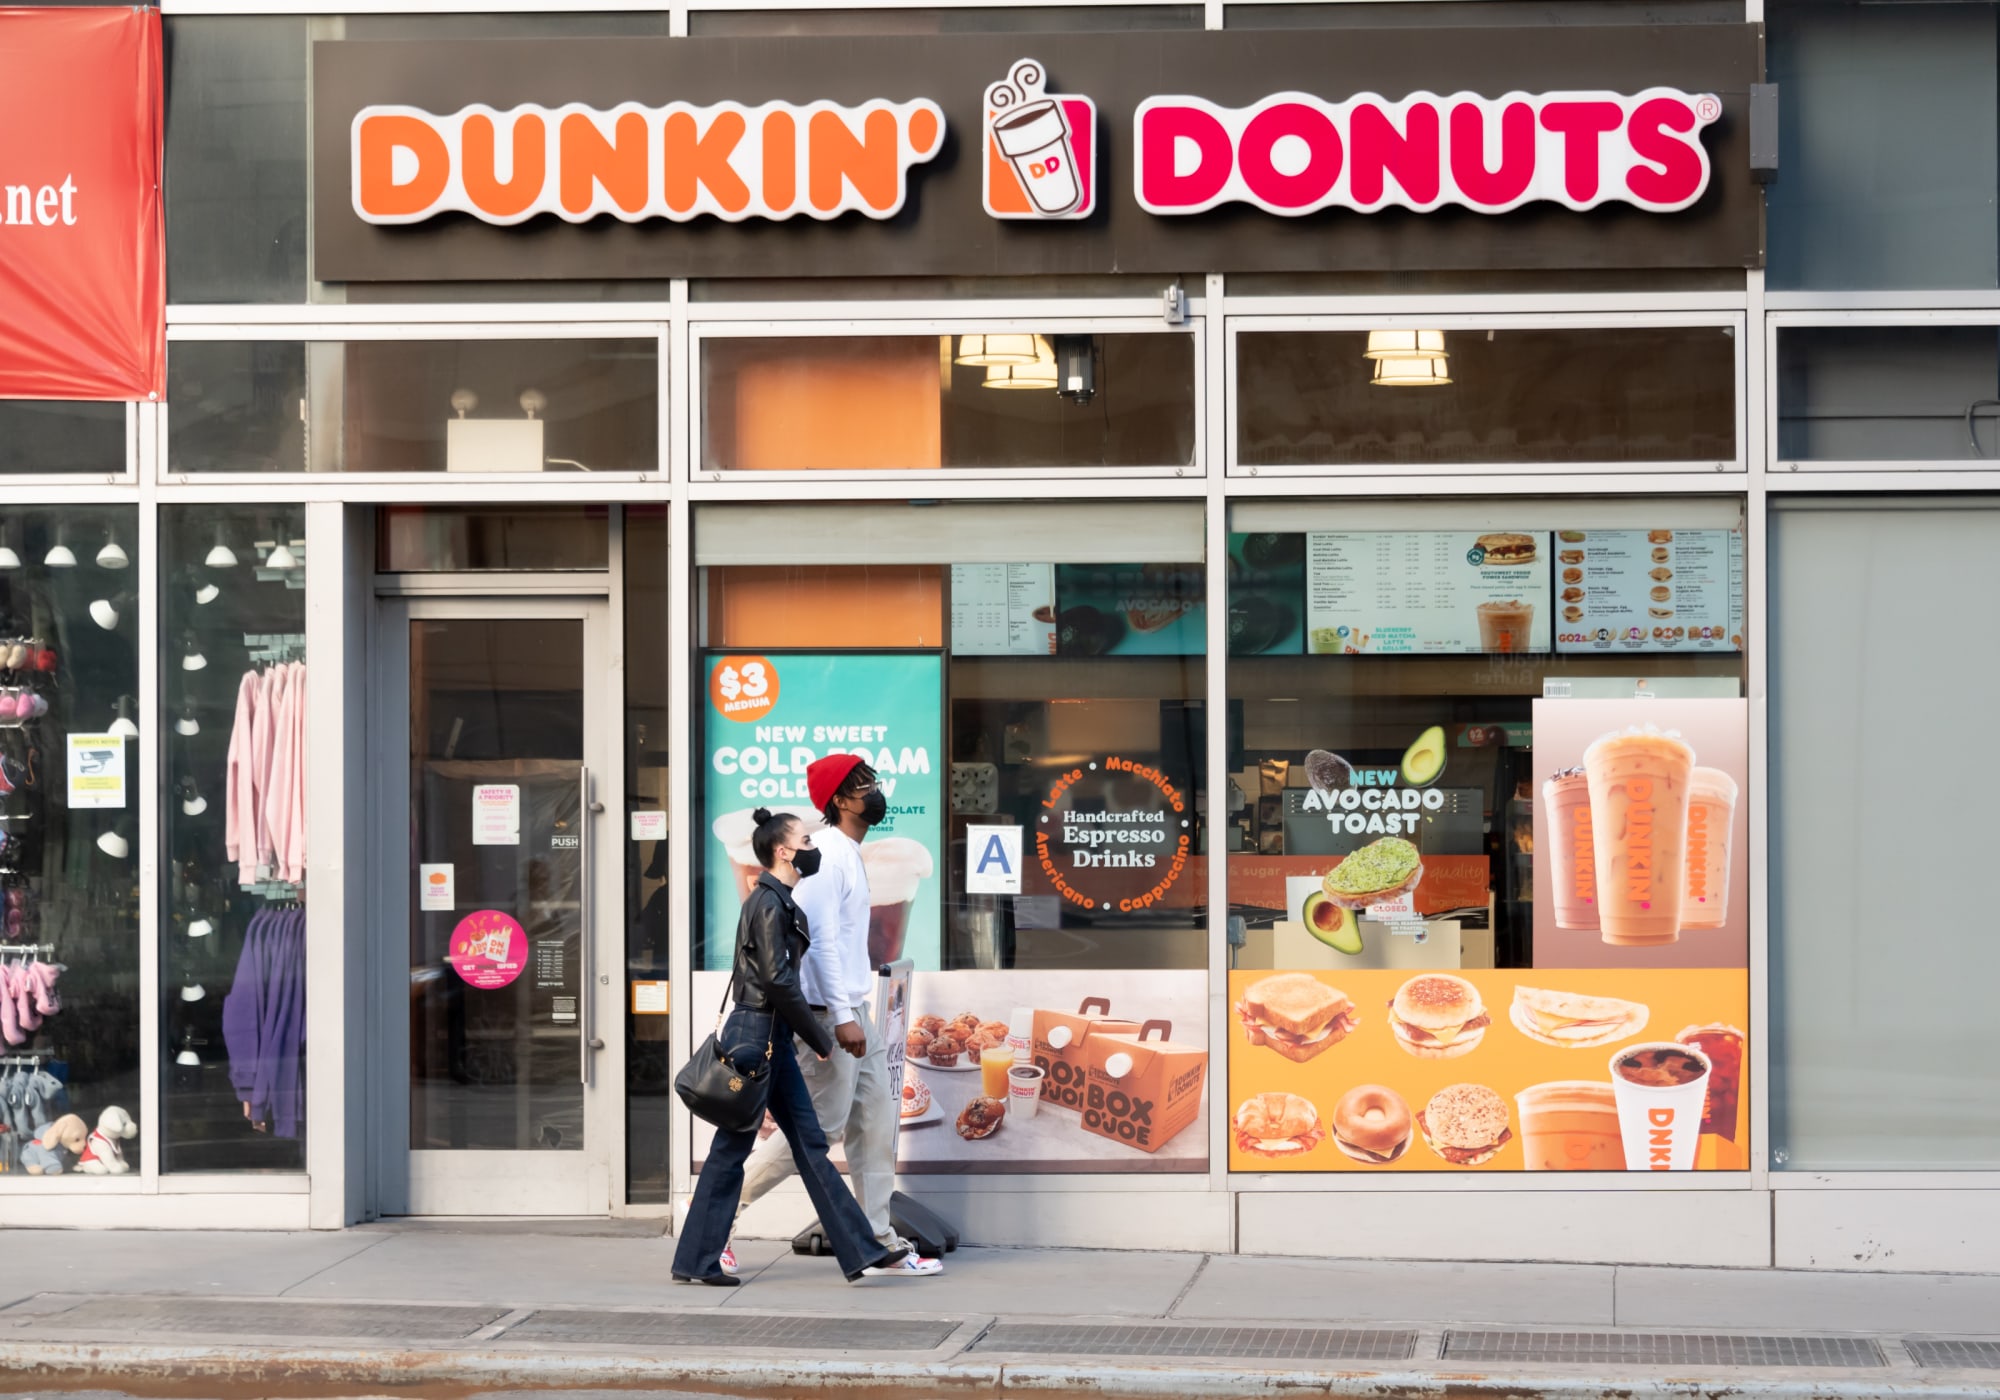 Dunkin': Will they be open or closed for Labor Day 2022?